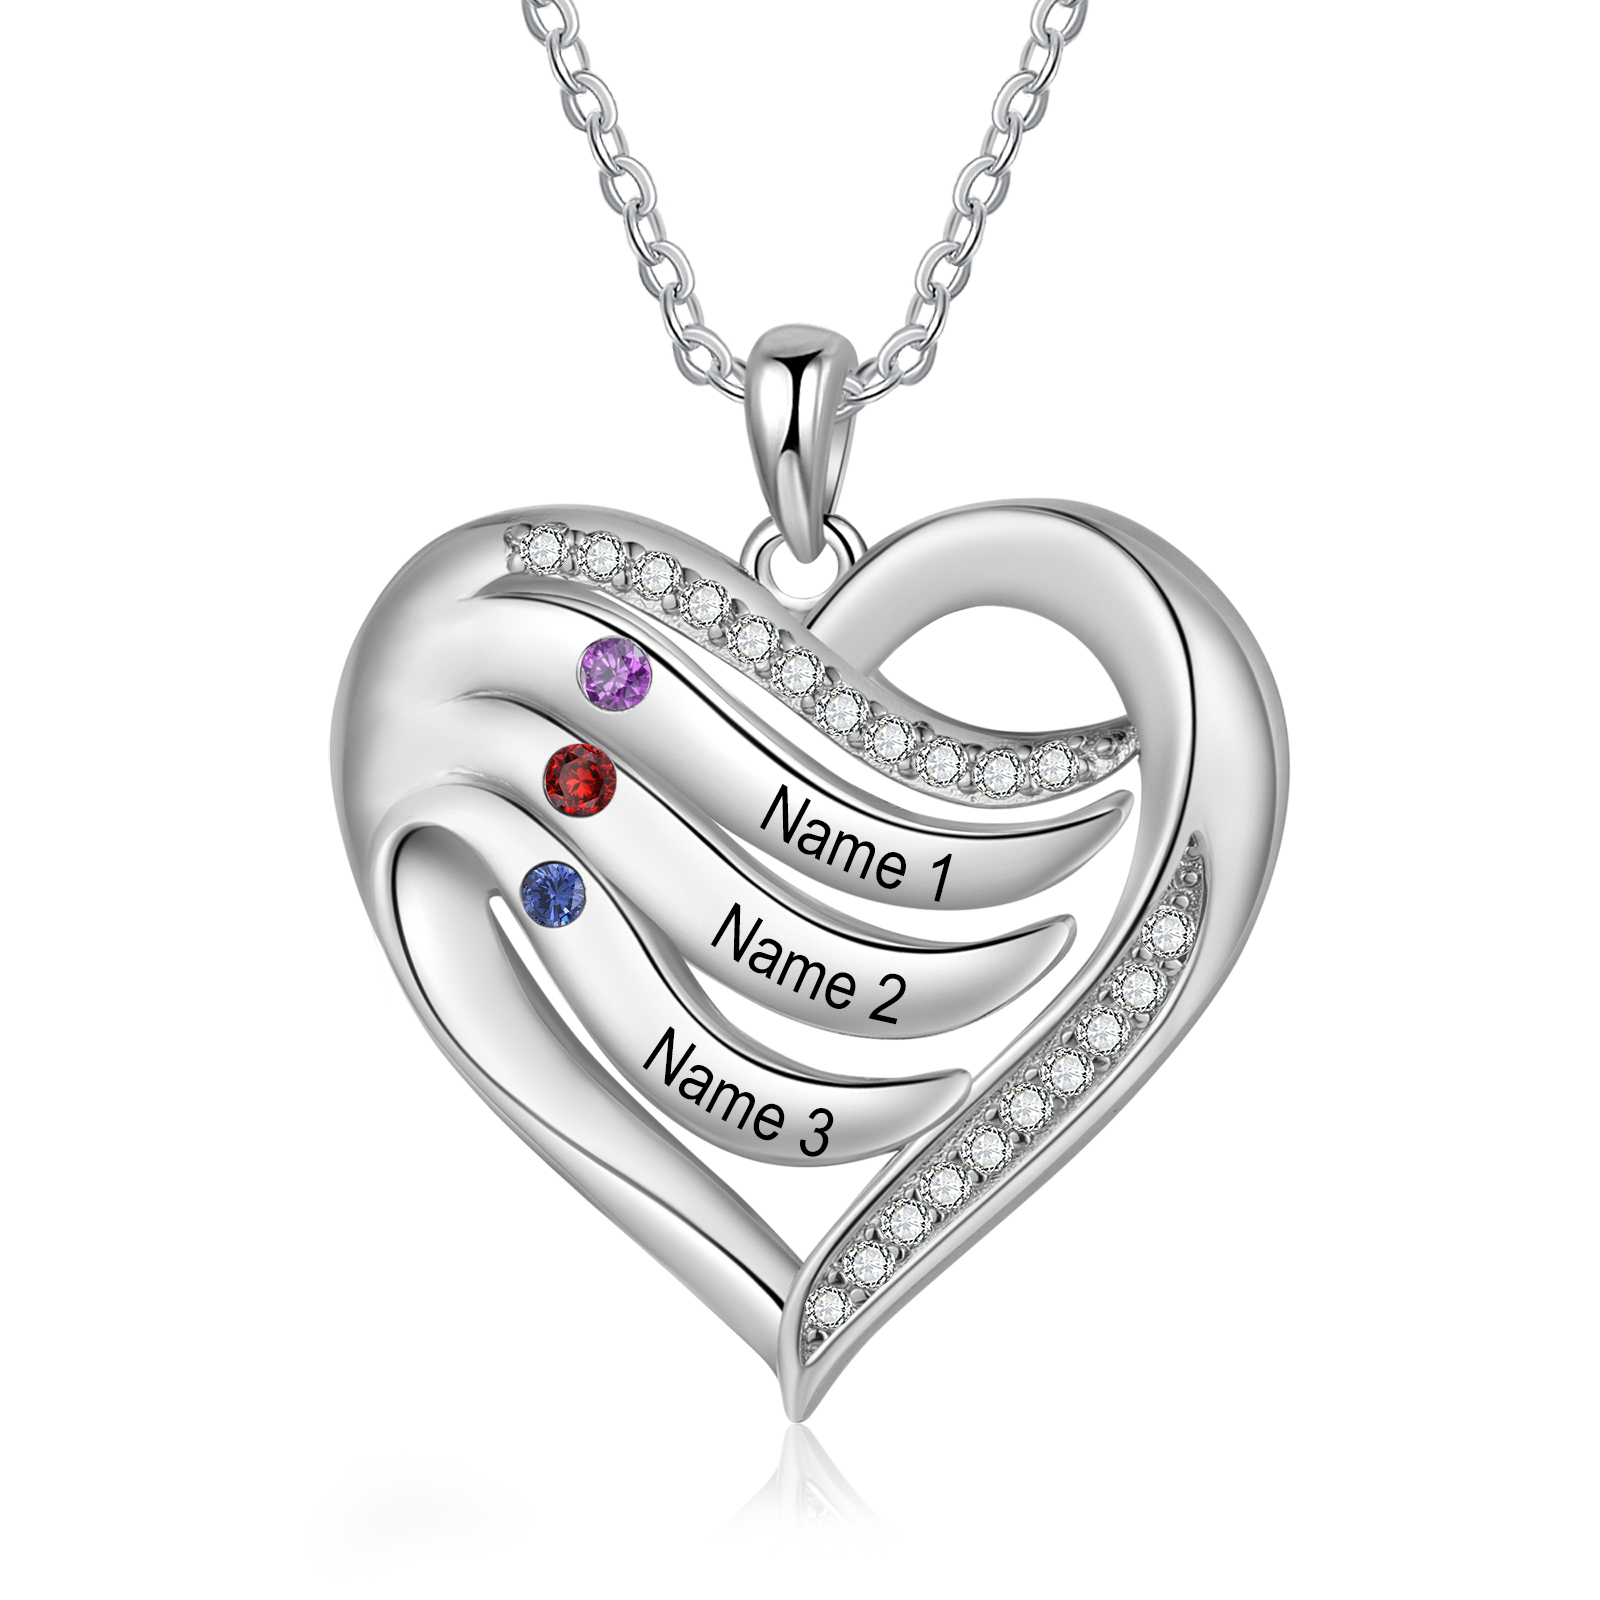 3 Names - Personalized S925 Silver Heart Necklace with Birthstone and Name, Beautiful Gift for Her